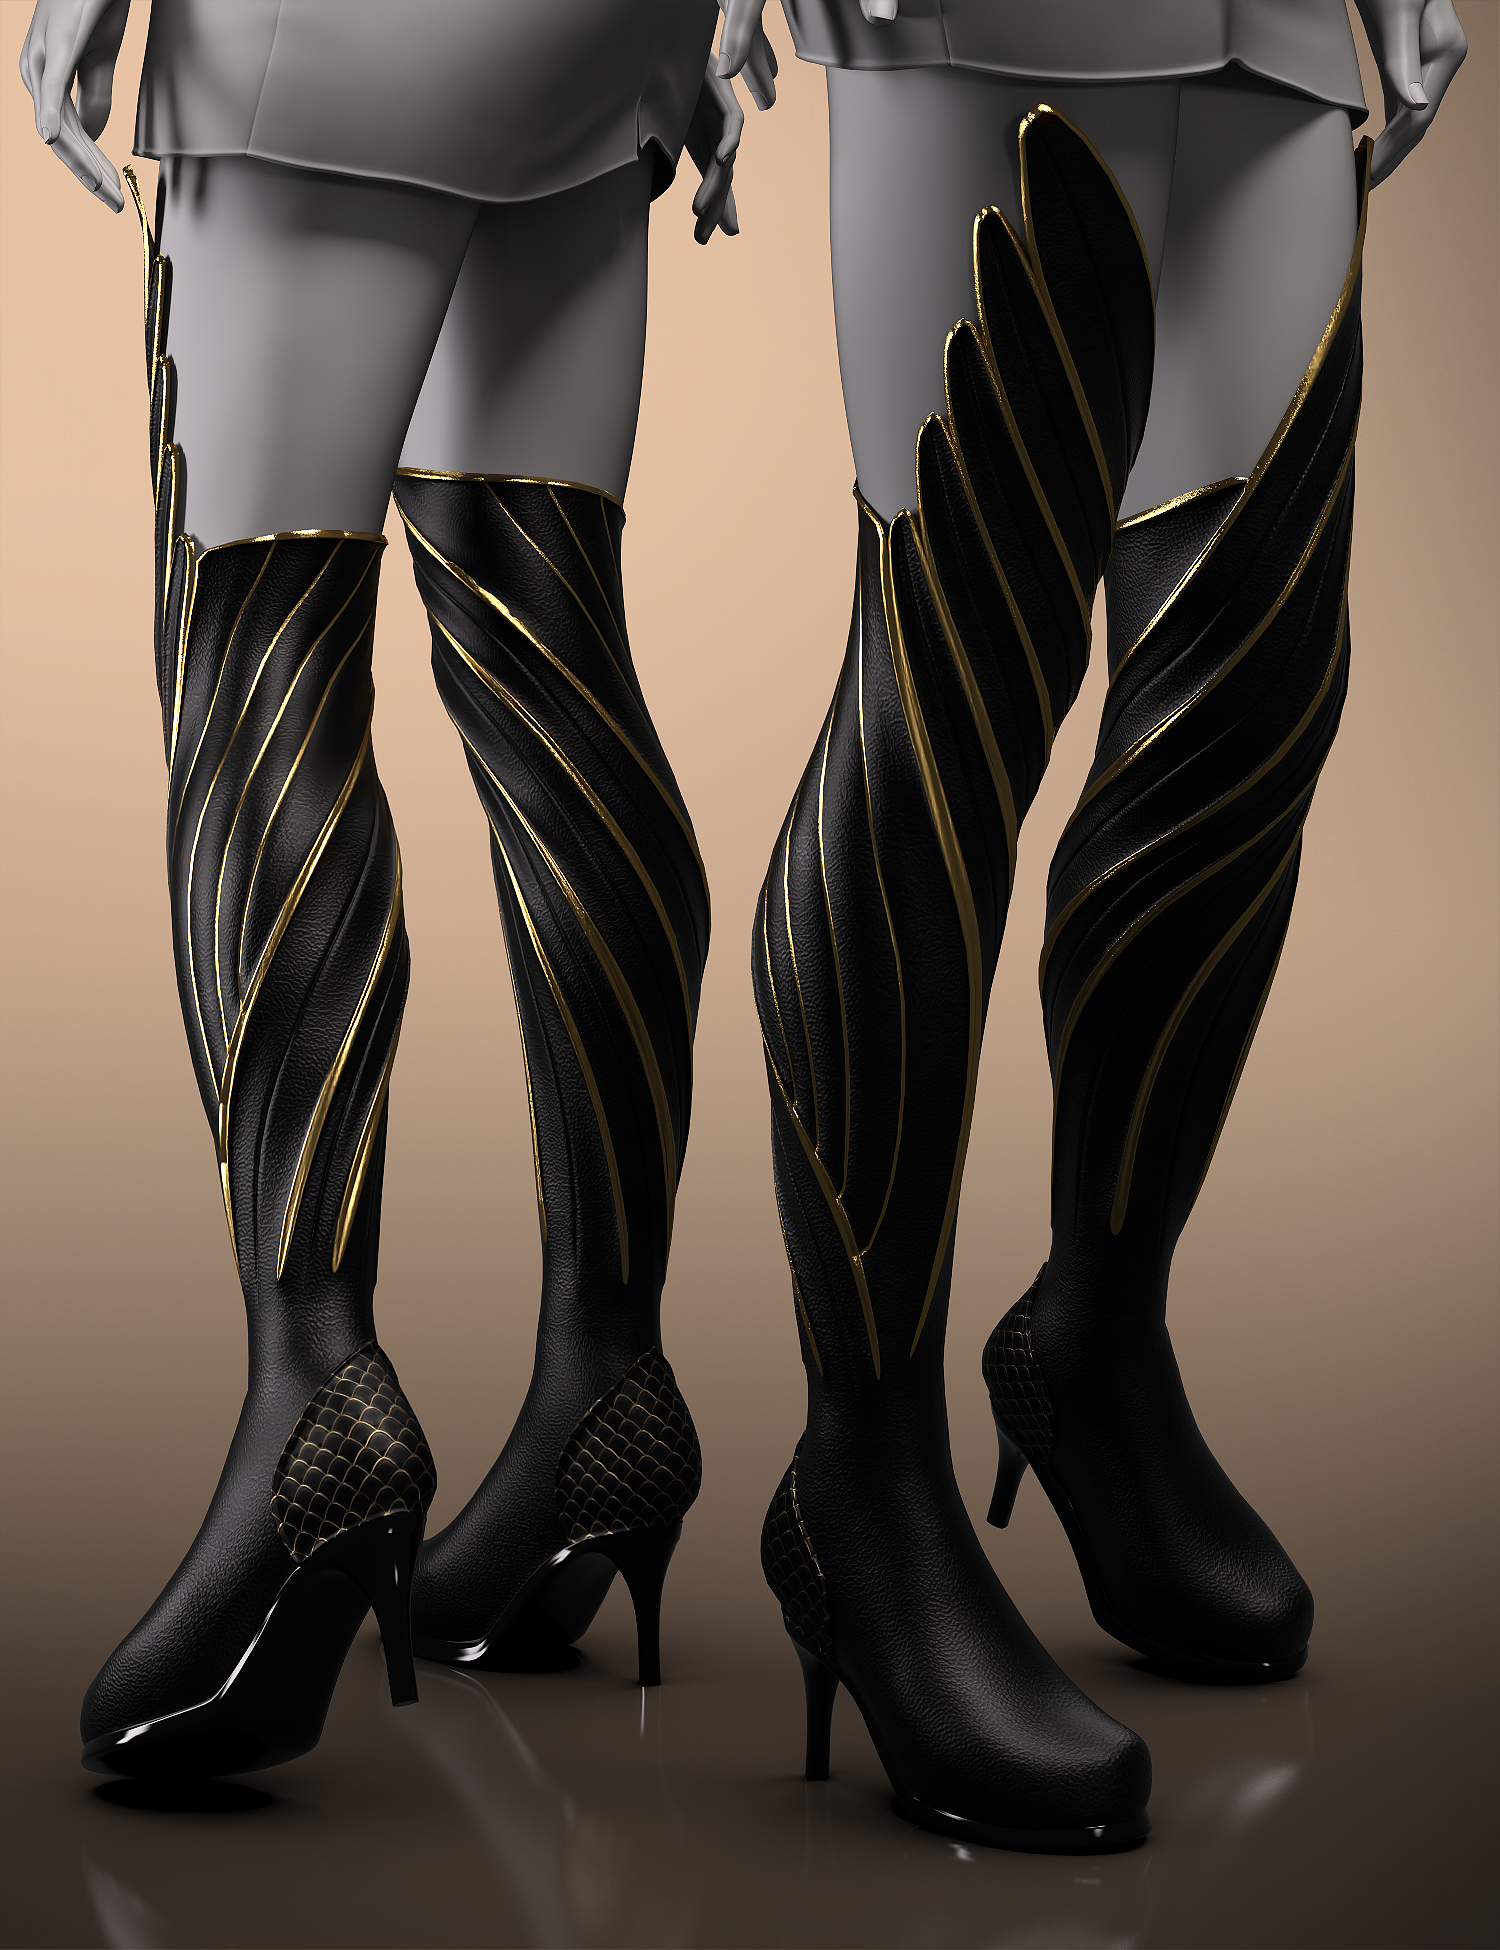 Keeper of the Feathers Boots for Genesis 8 and 8.1 Females | Daz 3D